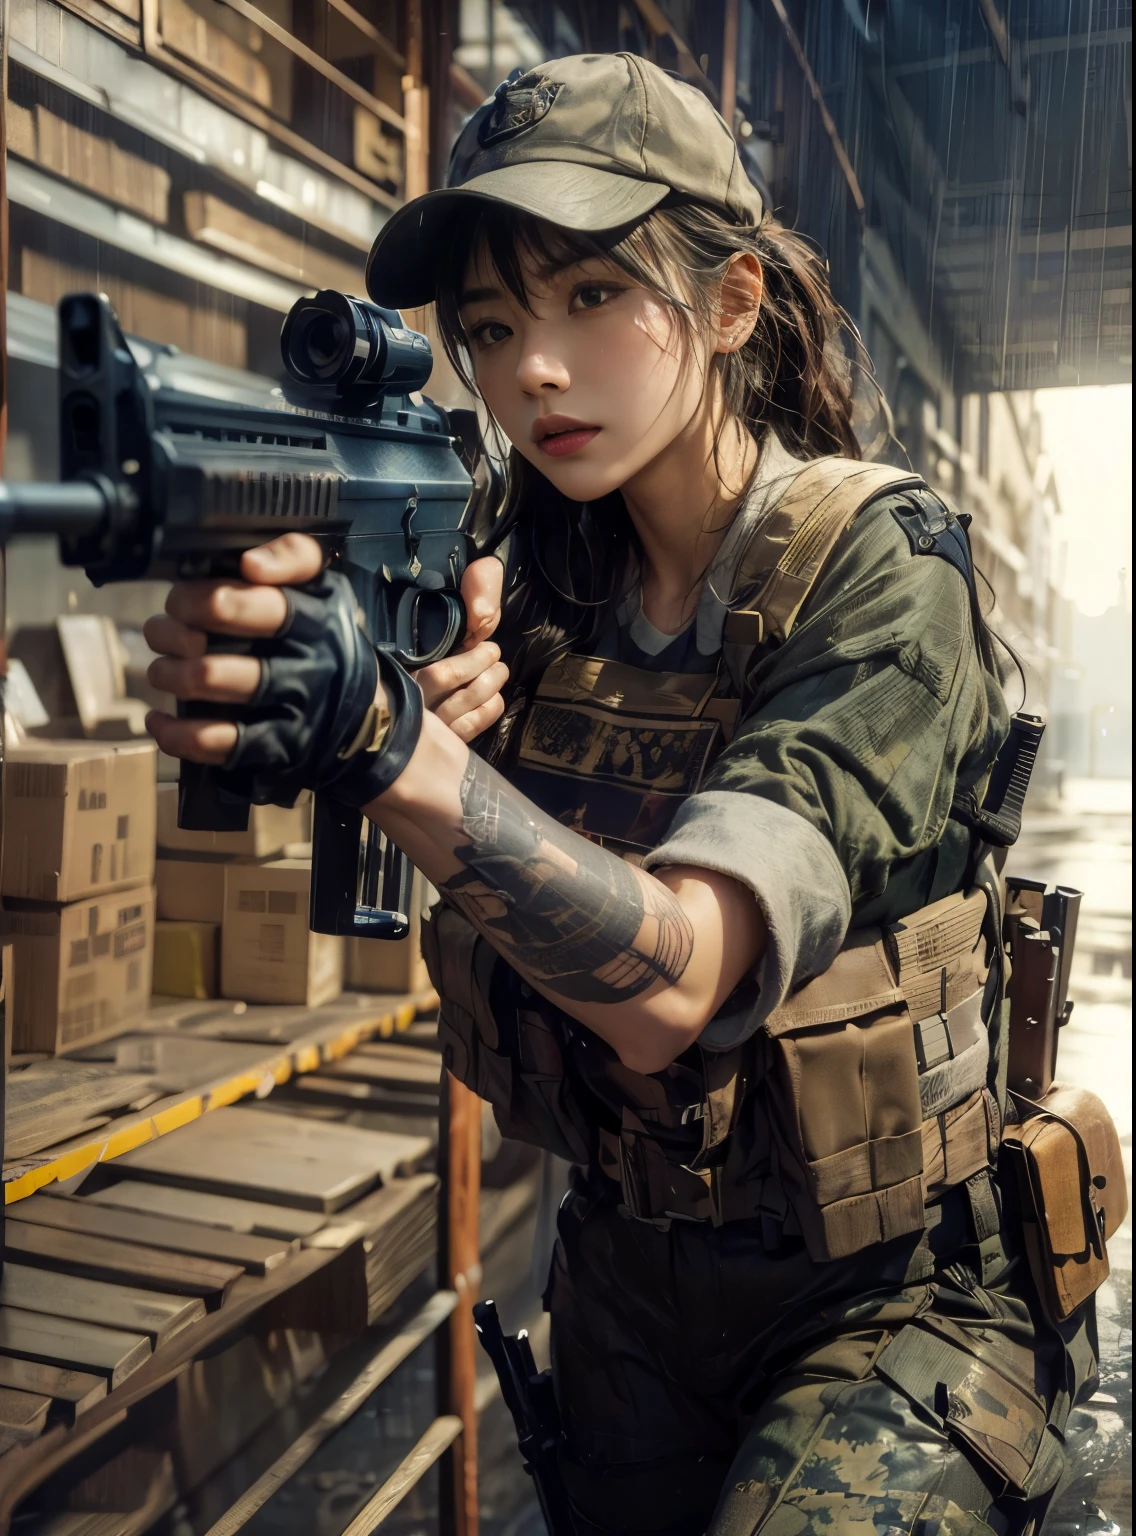 (best quality,8k,photorealistic:1.37),realistic skin texture, beautiful Japanese female marine, aiming with an assault rifle, old warehouse district by the harbor, green t-shirt, cap, braided hair, military pants, boots, dynamic pose, running along the warehouse wall, gunfight, daring assault, tattoos, getting wet in the rain, thunderstorm, toned body, muscles, anger, bold composition